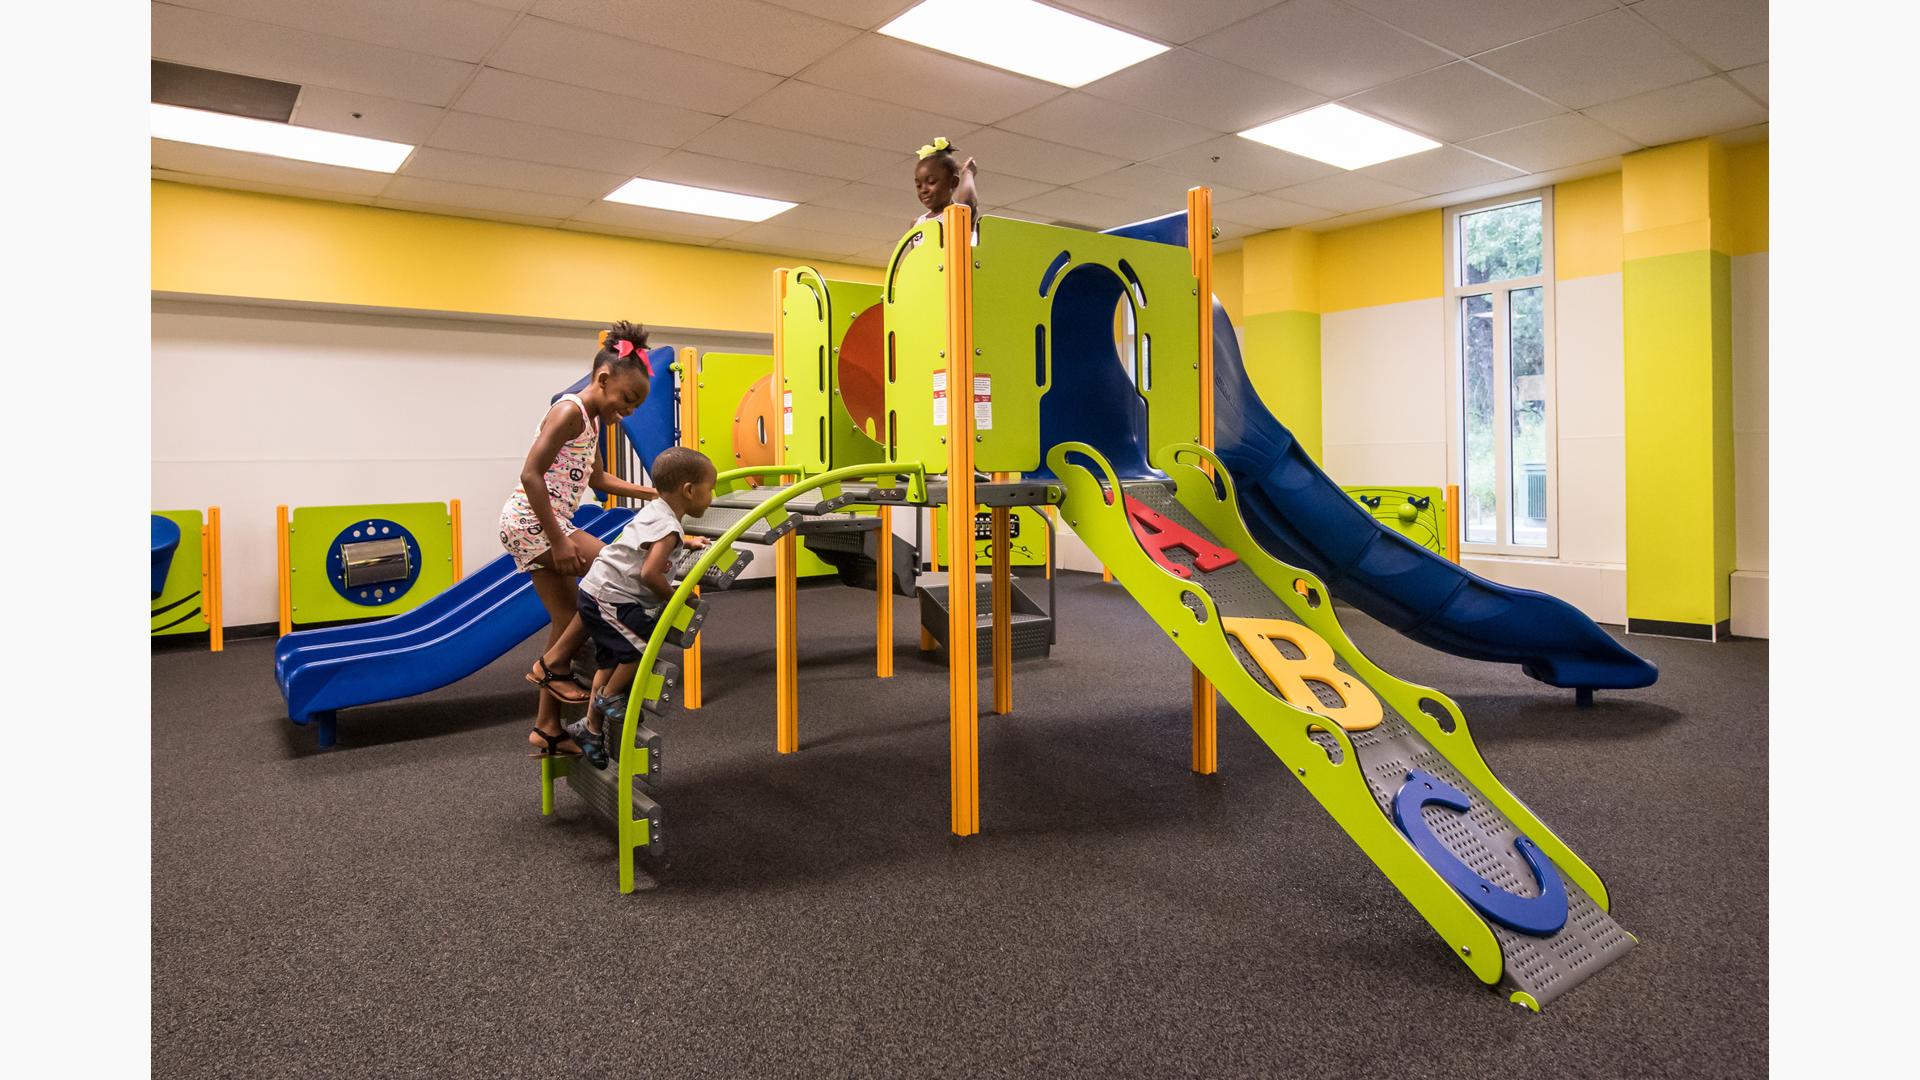 Orland Park Recreation Center, Orland Park, IL featuring a PlayShaper® play structure with a variety of playground climbers like the ABC Climber and slides like the SlideWinder2®.